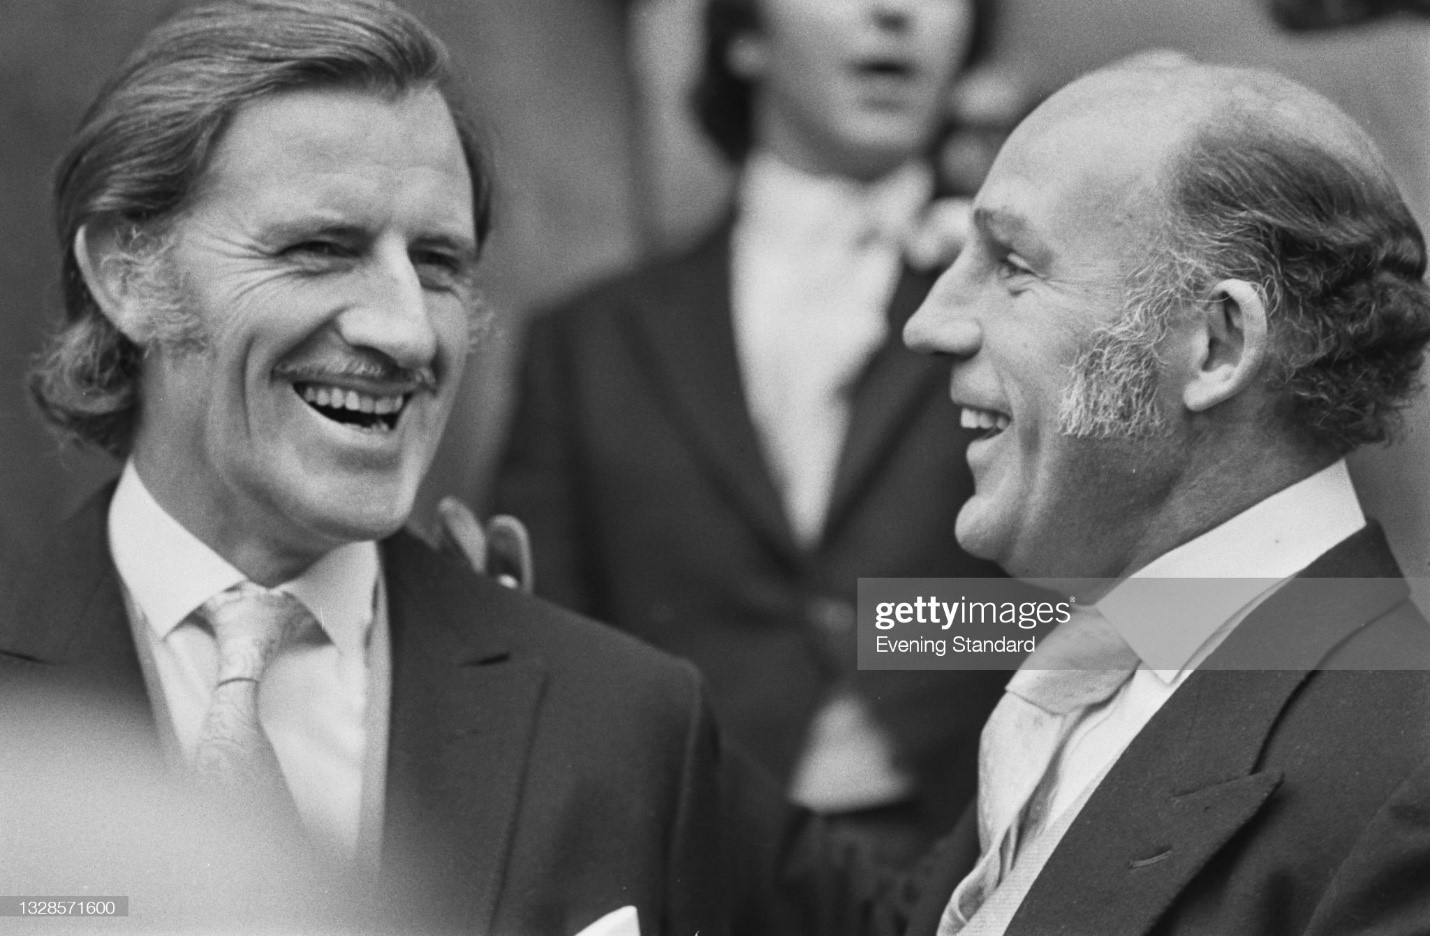 British F1 legends Graham Hill (left) and Stirling Moss attend the wedding of another British driver James Hunt. Hunt wed to model Suzy Miller at Brompton Oratory, London. 